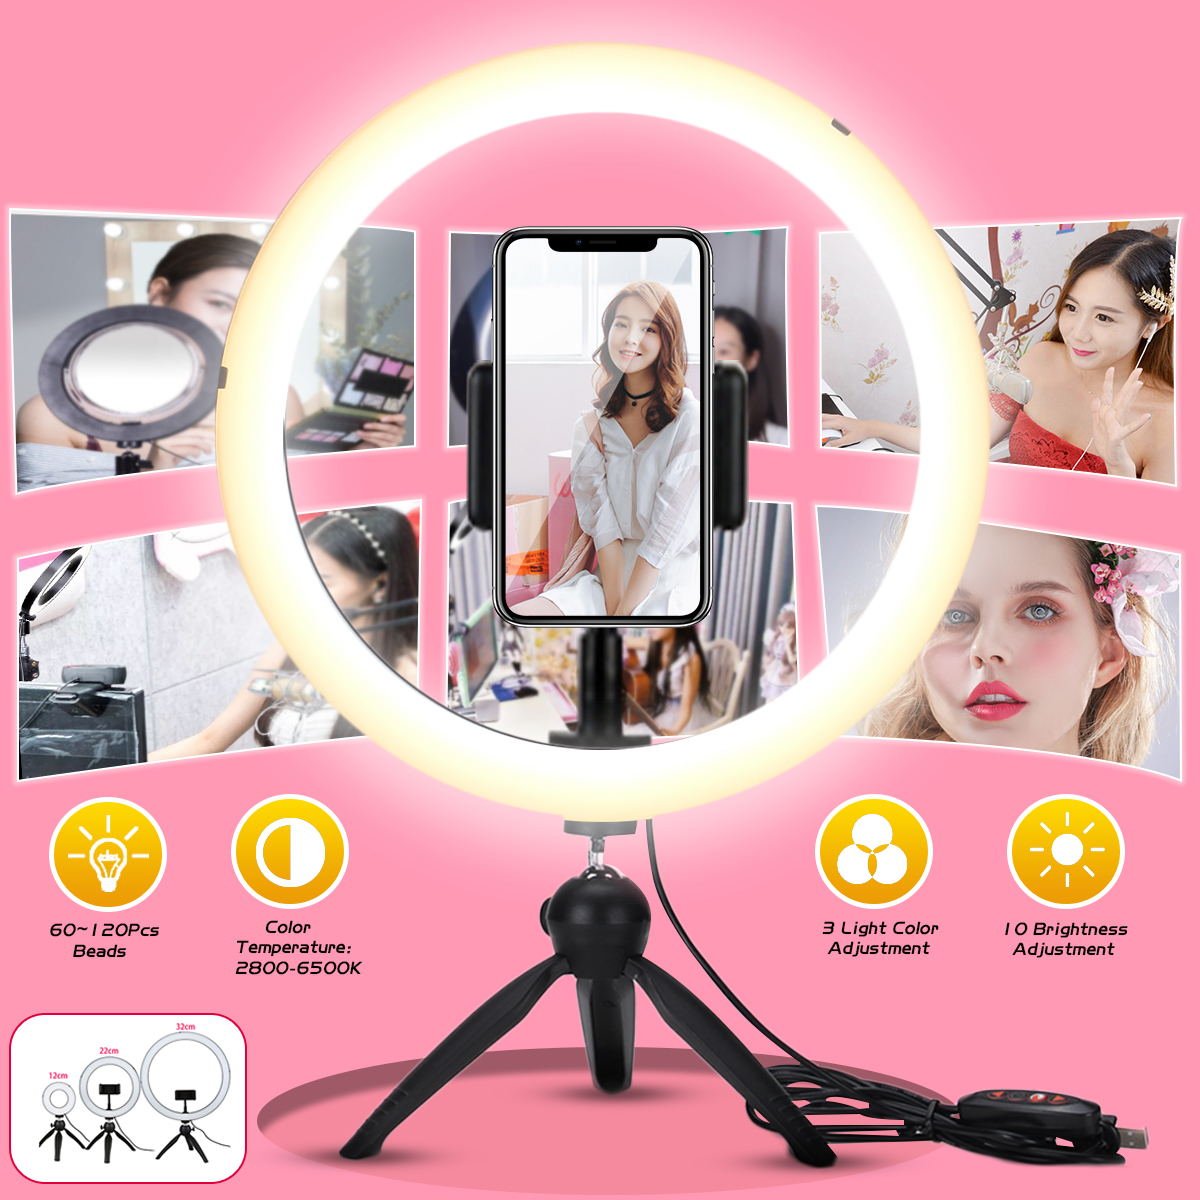 Ring-Light-LED-Makeup-Ring-Lamp-USB-Portable-Selfie-Ring-Lamp-Phone-Holder-Tripod-Stand-Photography--1579907-1